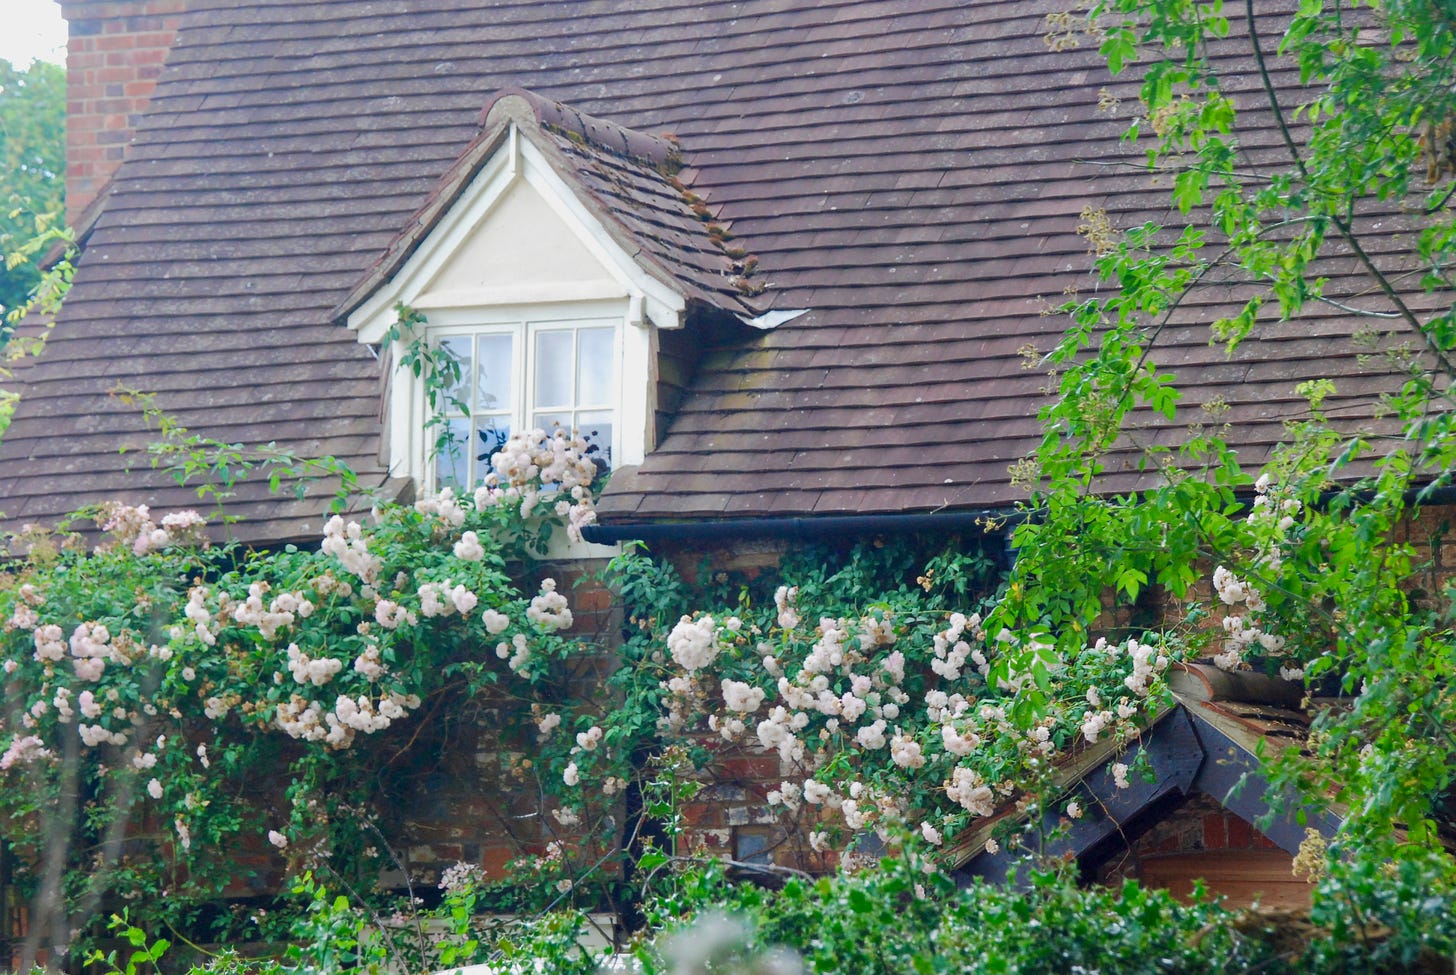 The rose-covered window in 2017 at Rose Cottage - home and garden of author Elizabeth Goudge. 